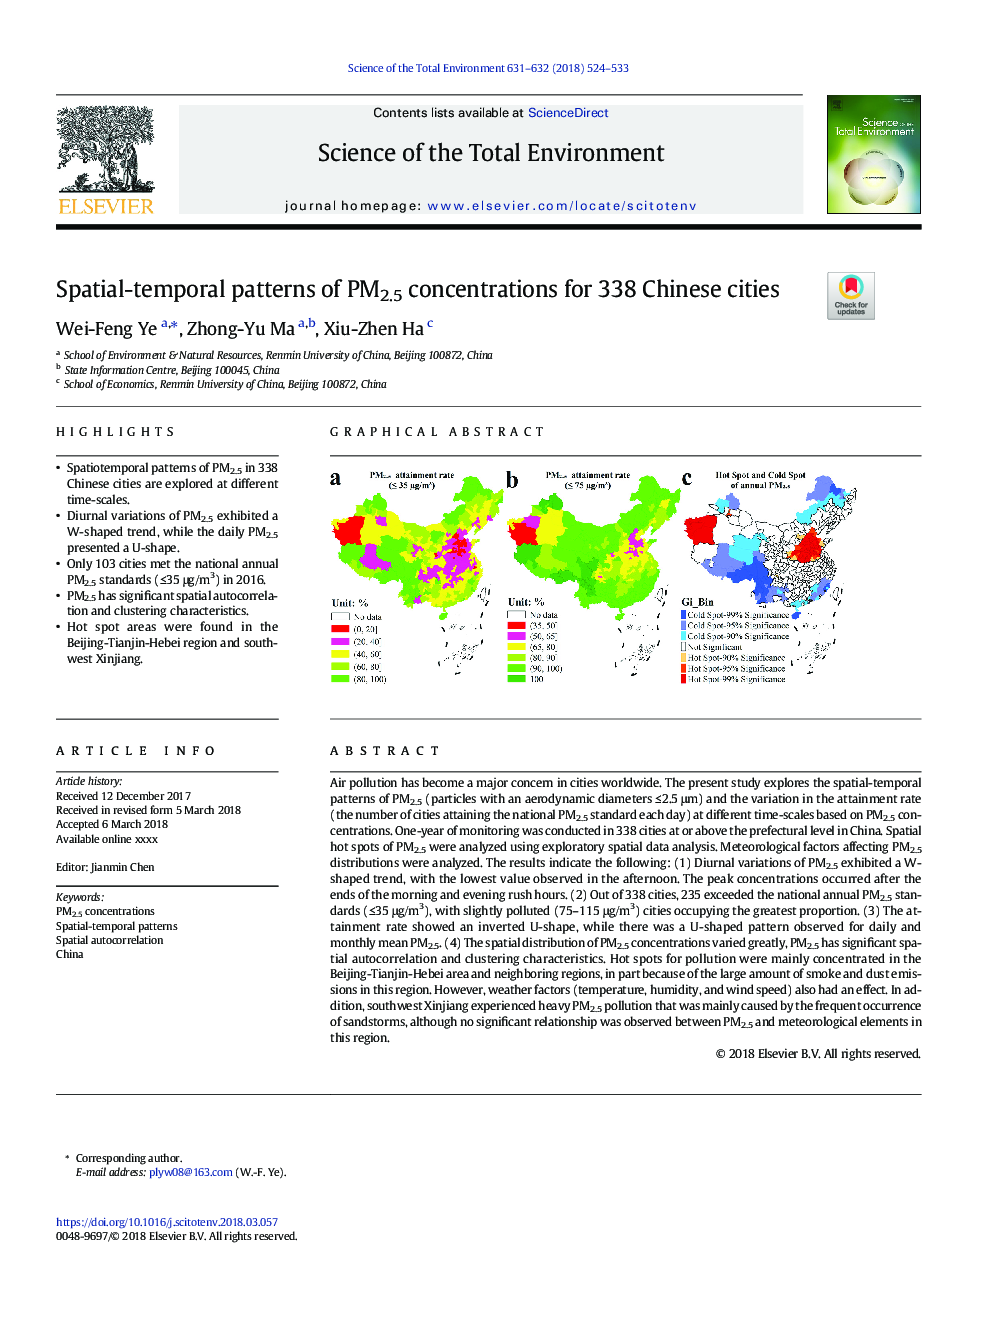 Spatial-temporal patterns of PM2.5 concentrations for 338 Chinese cities